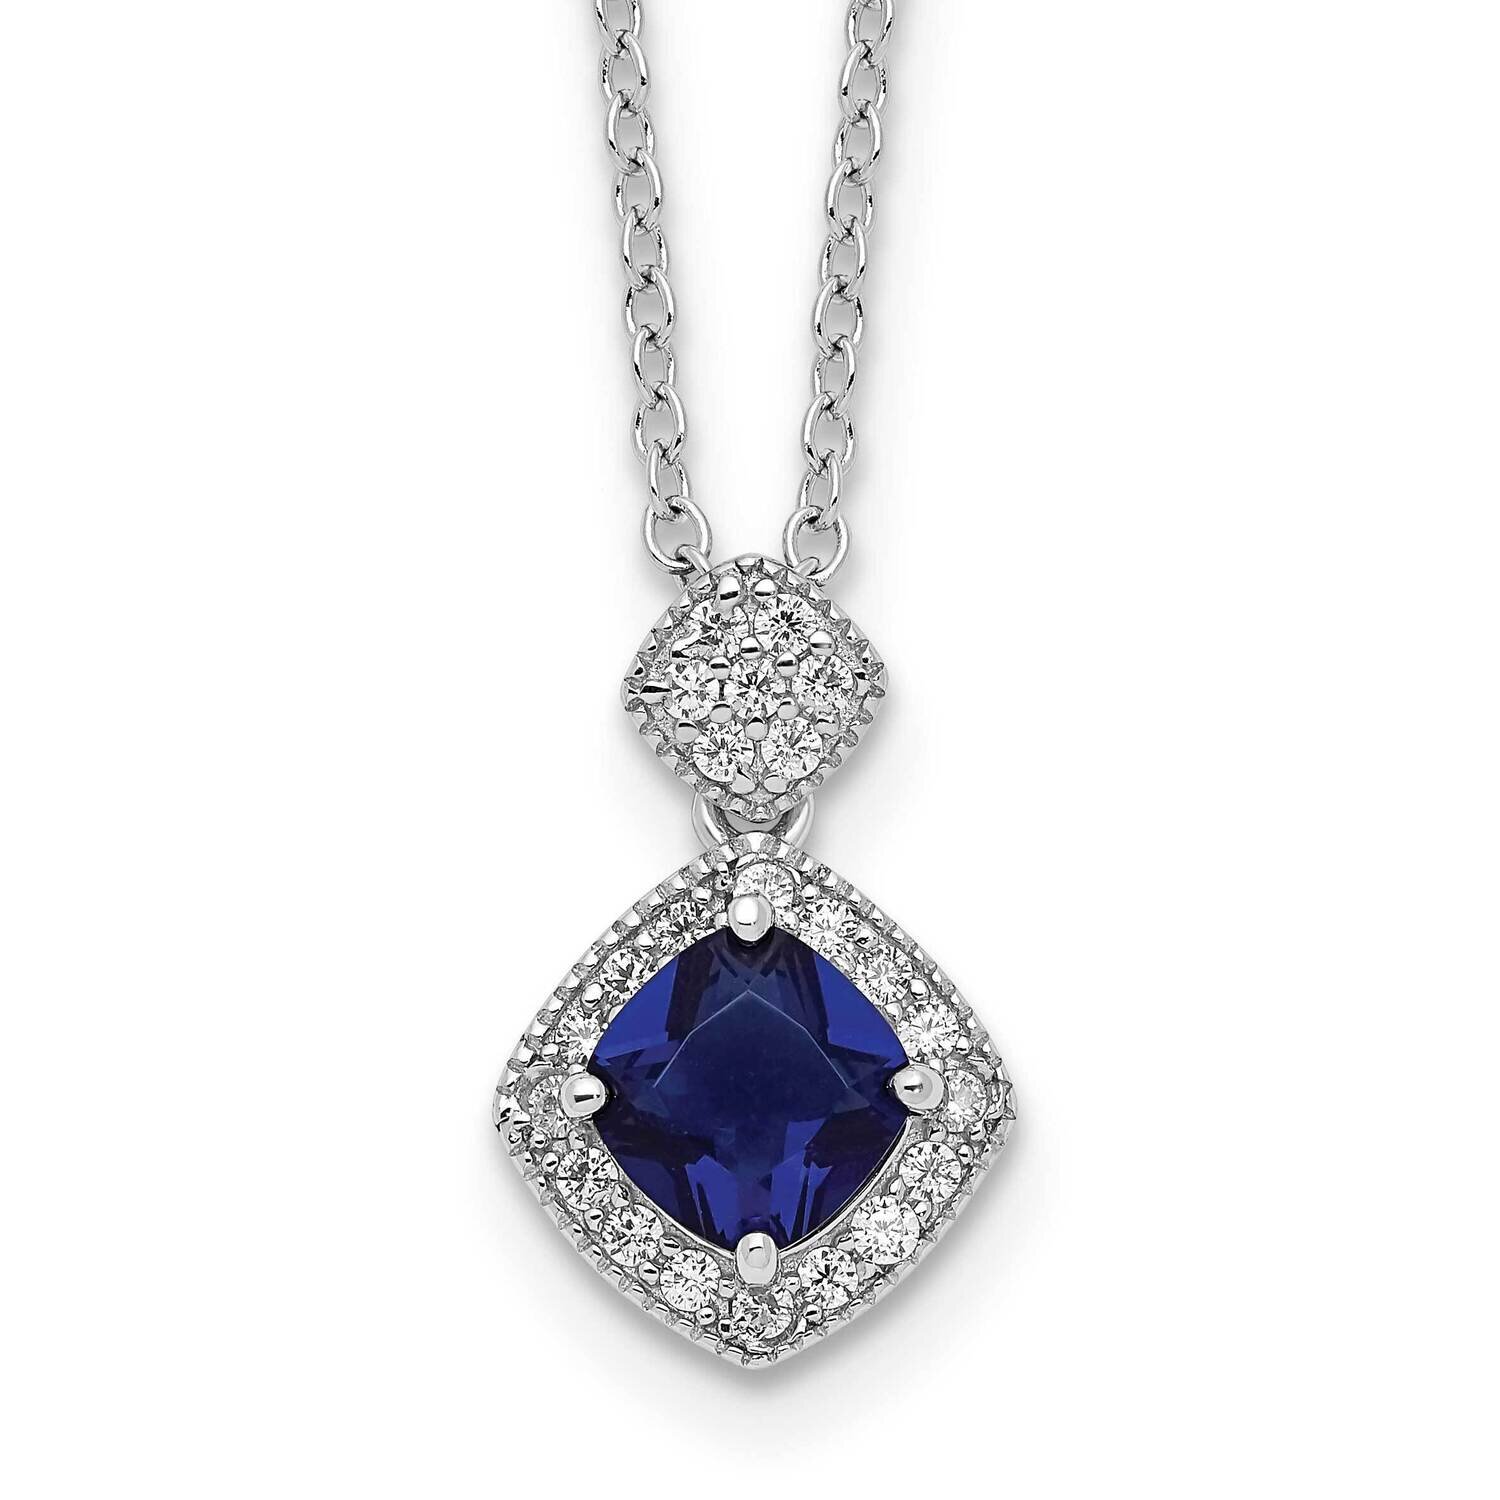 Cheryl M Rhodium-Plated Blue Glass and CZ Diamond Necklace Sterling Silver QCM1530-18